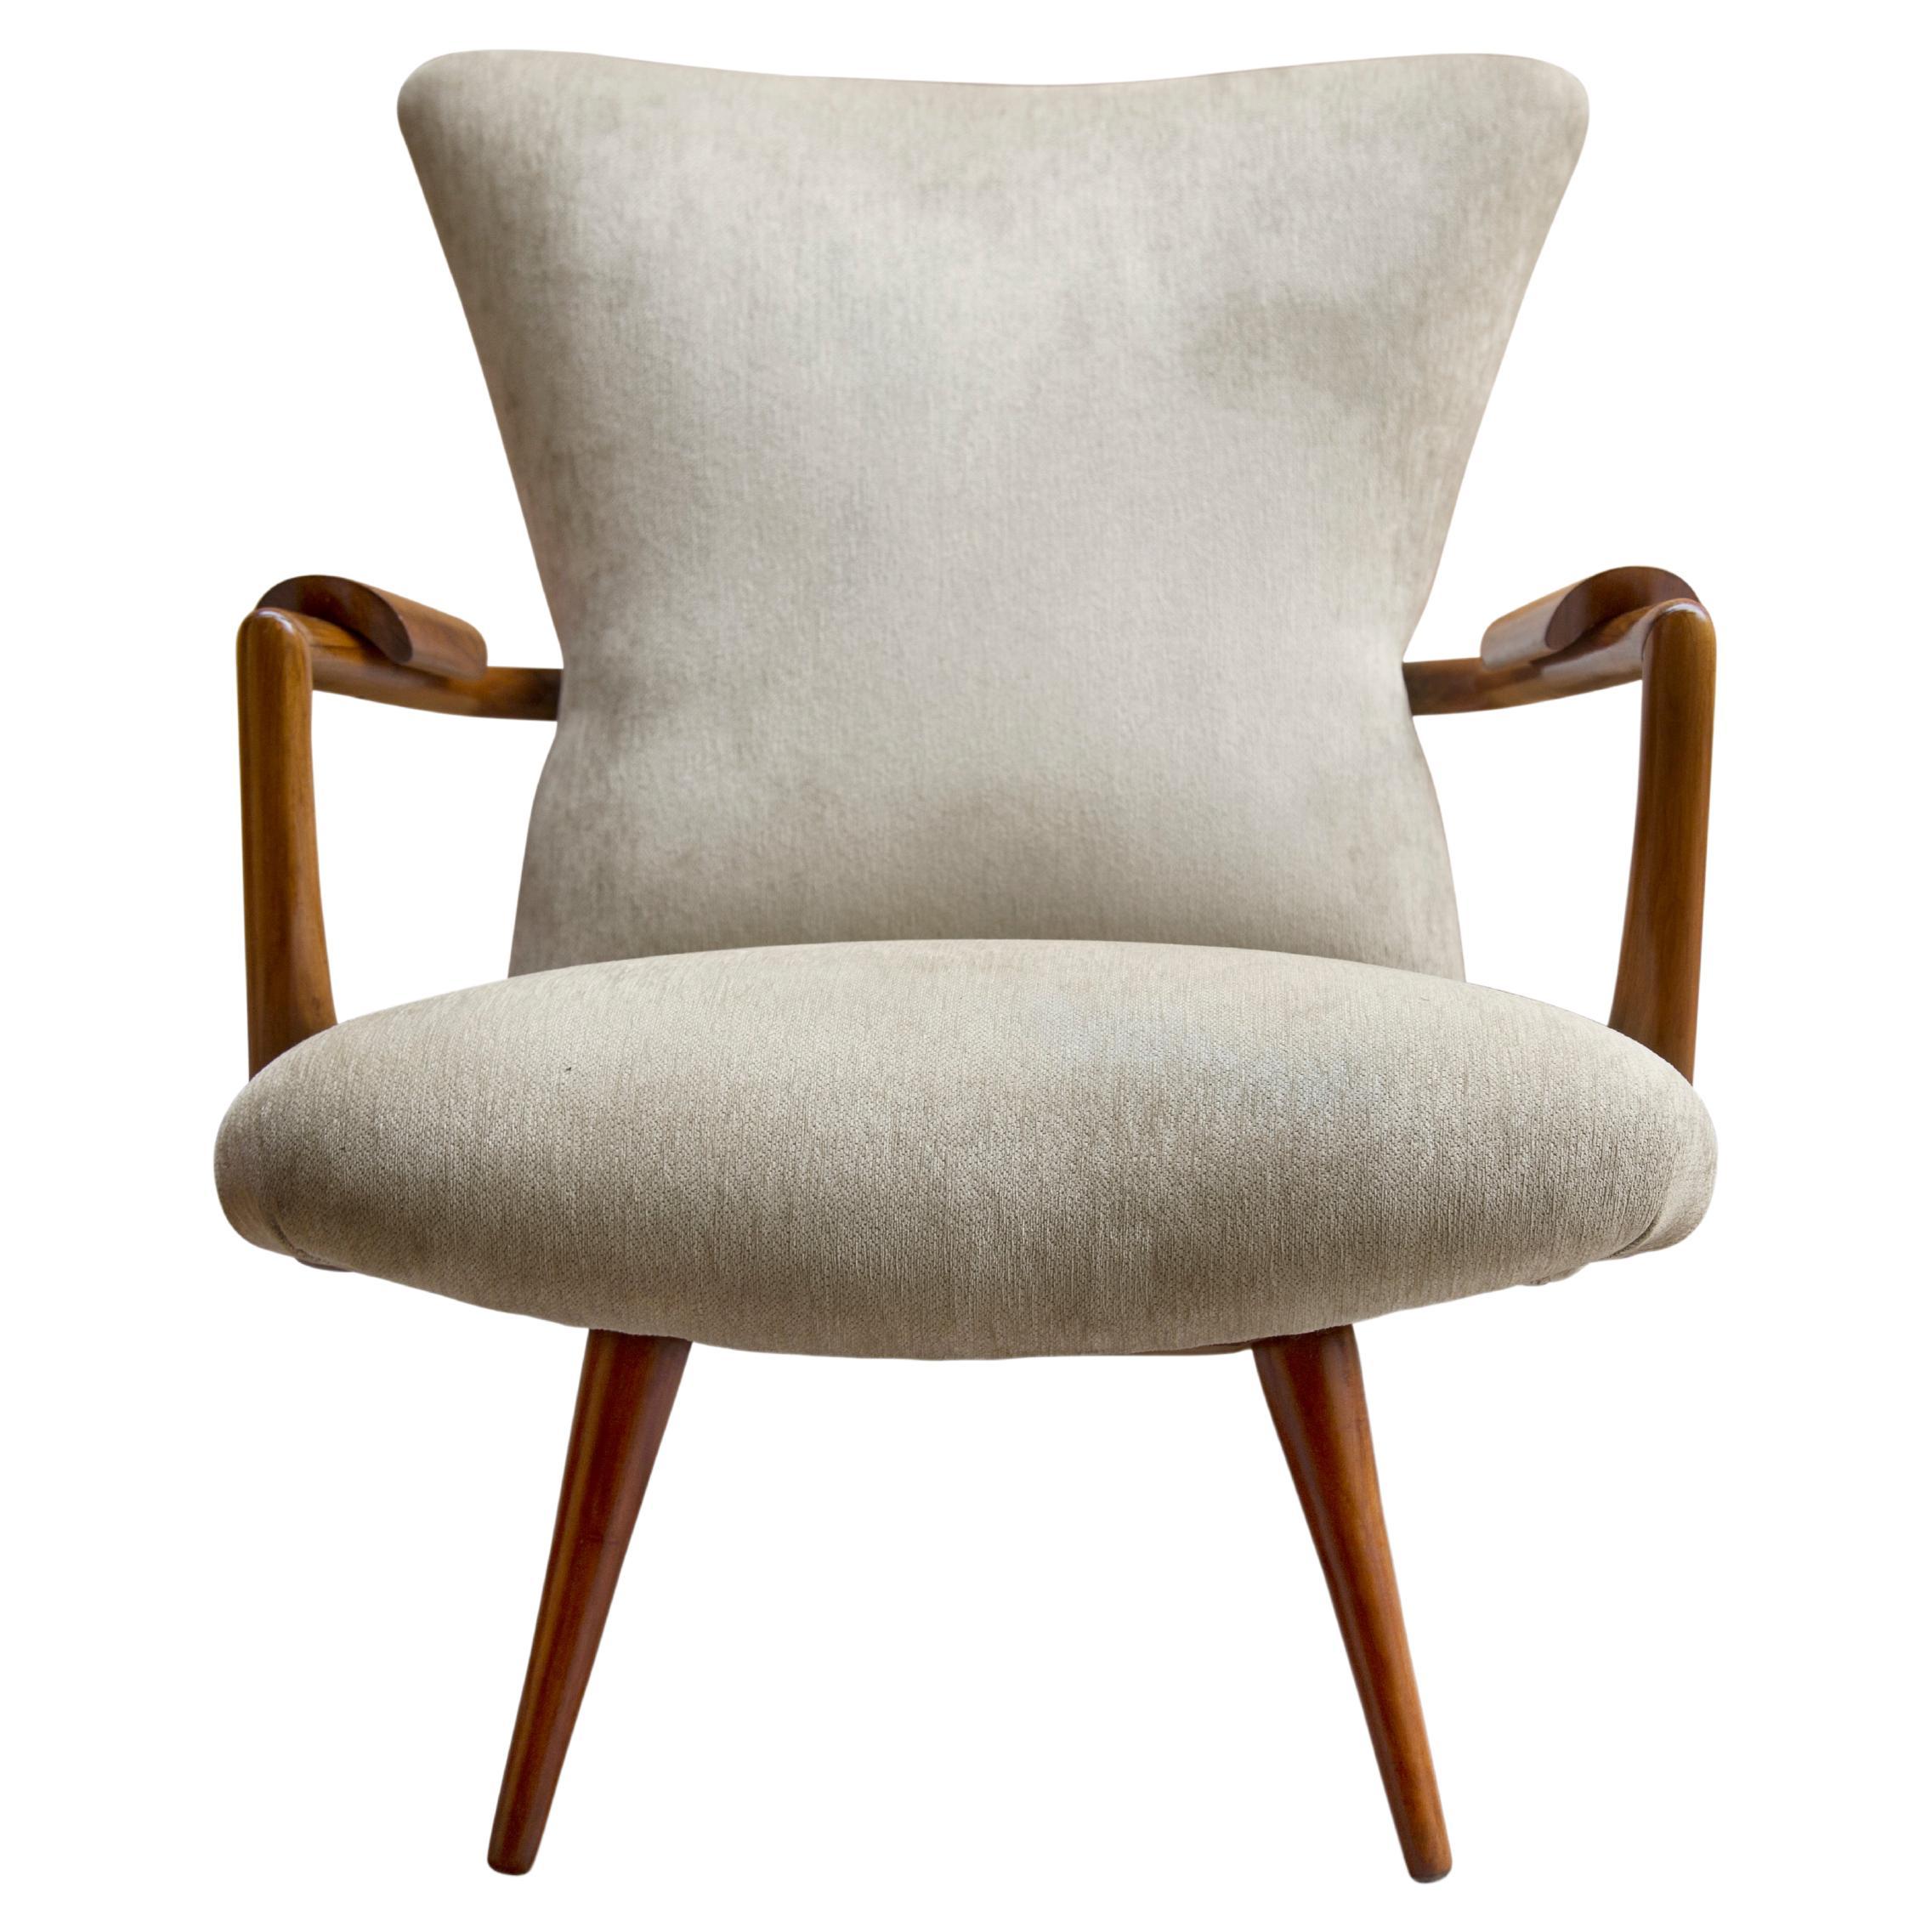 Available today, this mid-century modern armchair by Giuseppe Scapinelli is absolutely gorgeous! The armchair features a caviuna wood structure with curved arms, toothpick legs, and a beige fabric. Also, the backrest and seat have the original